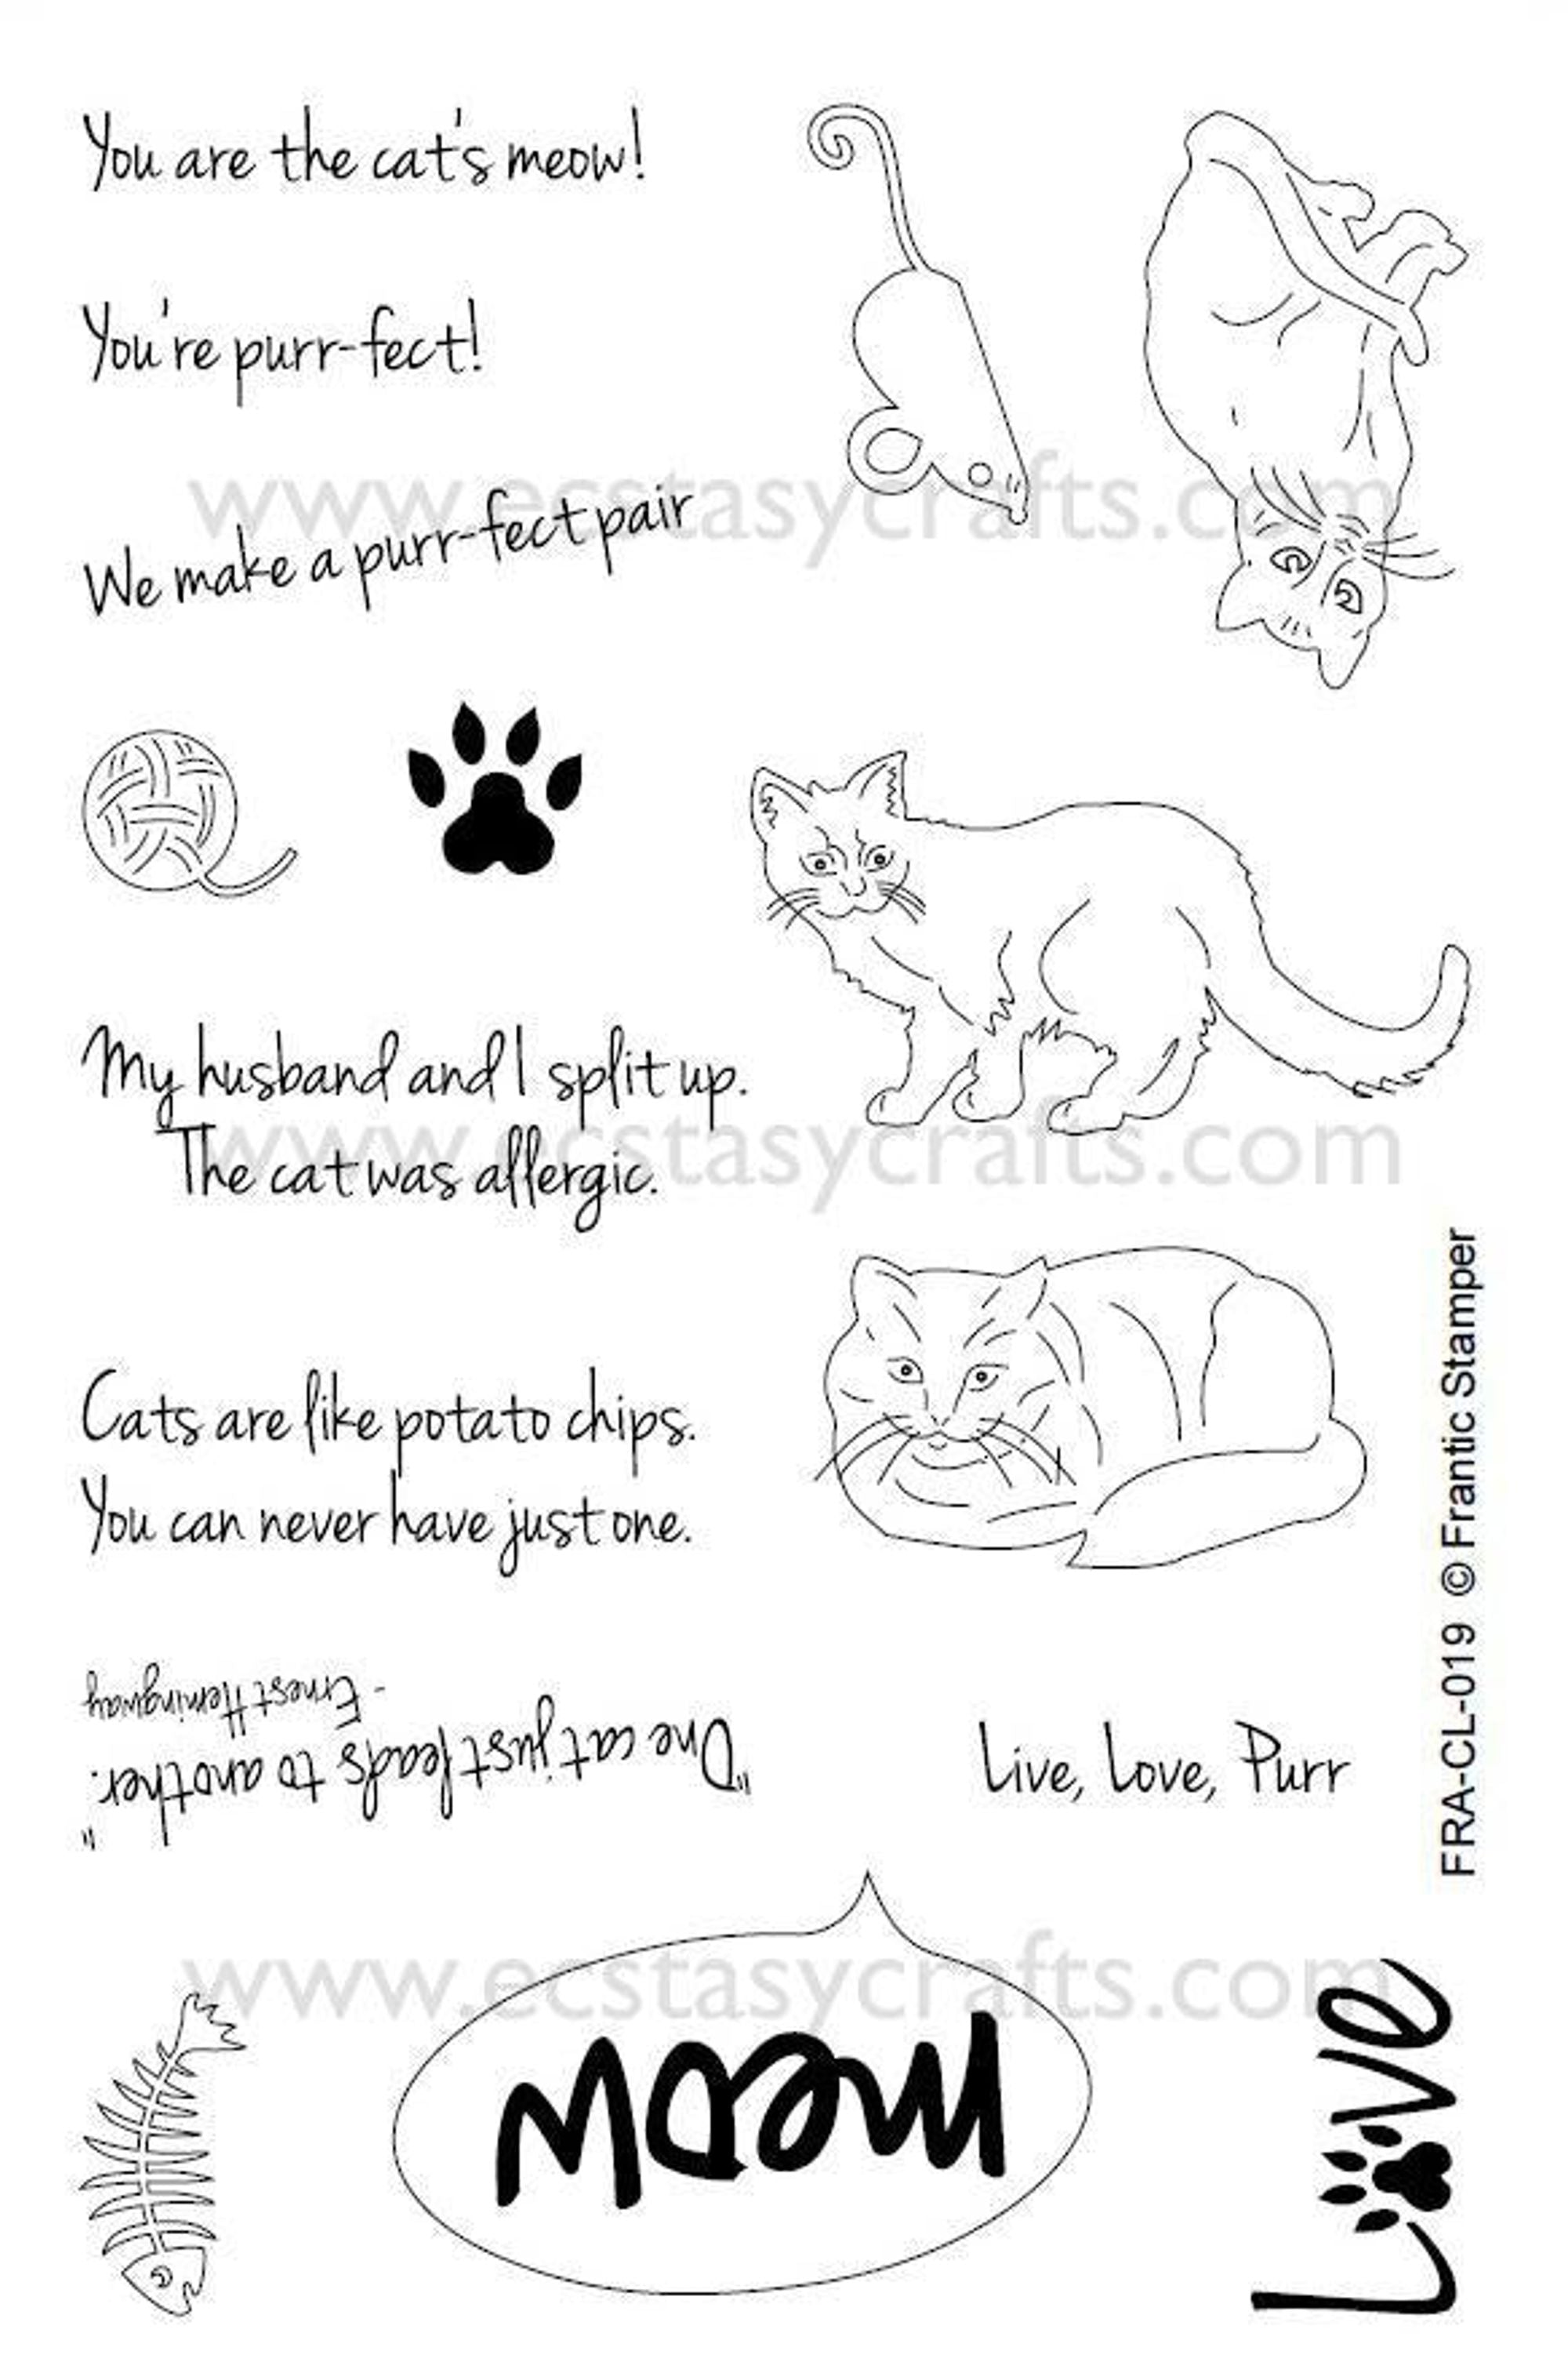 Meow Girl Cat Address Stamp - Simply Stamps